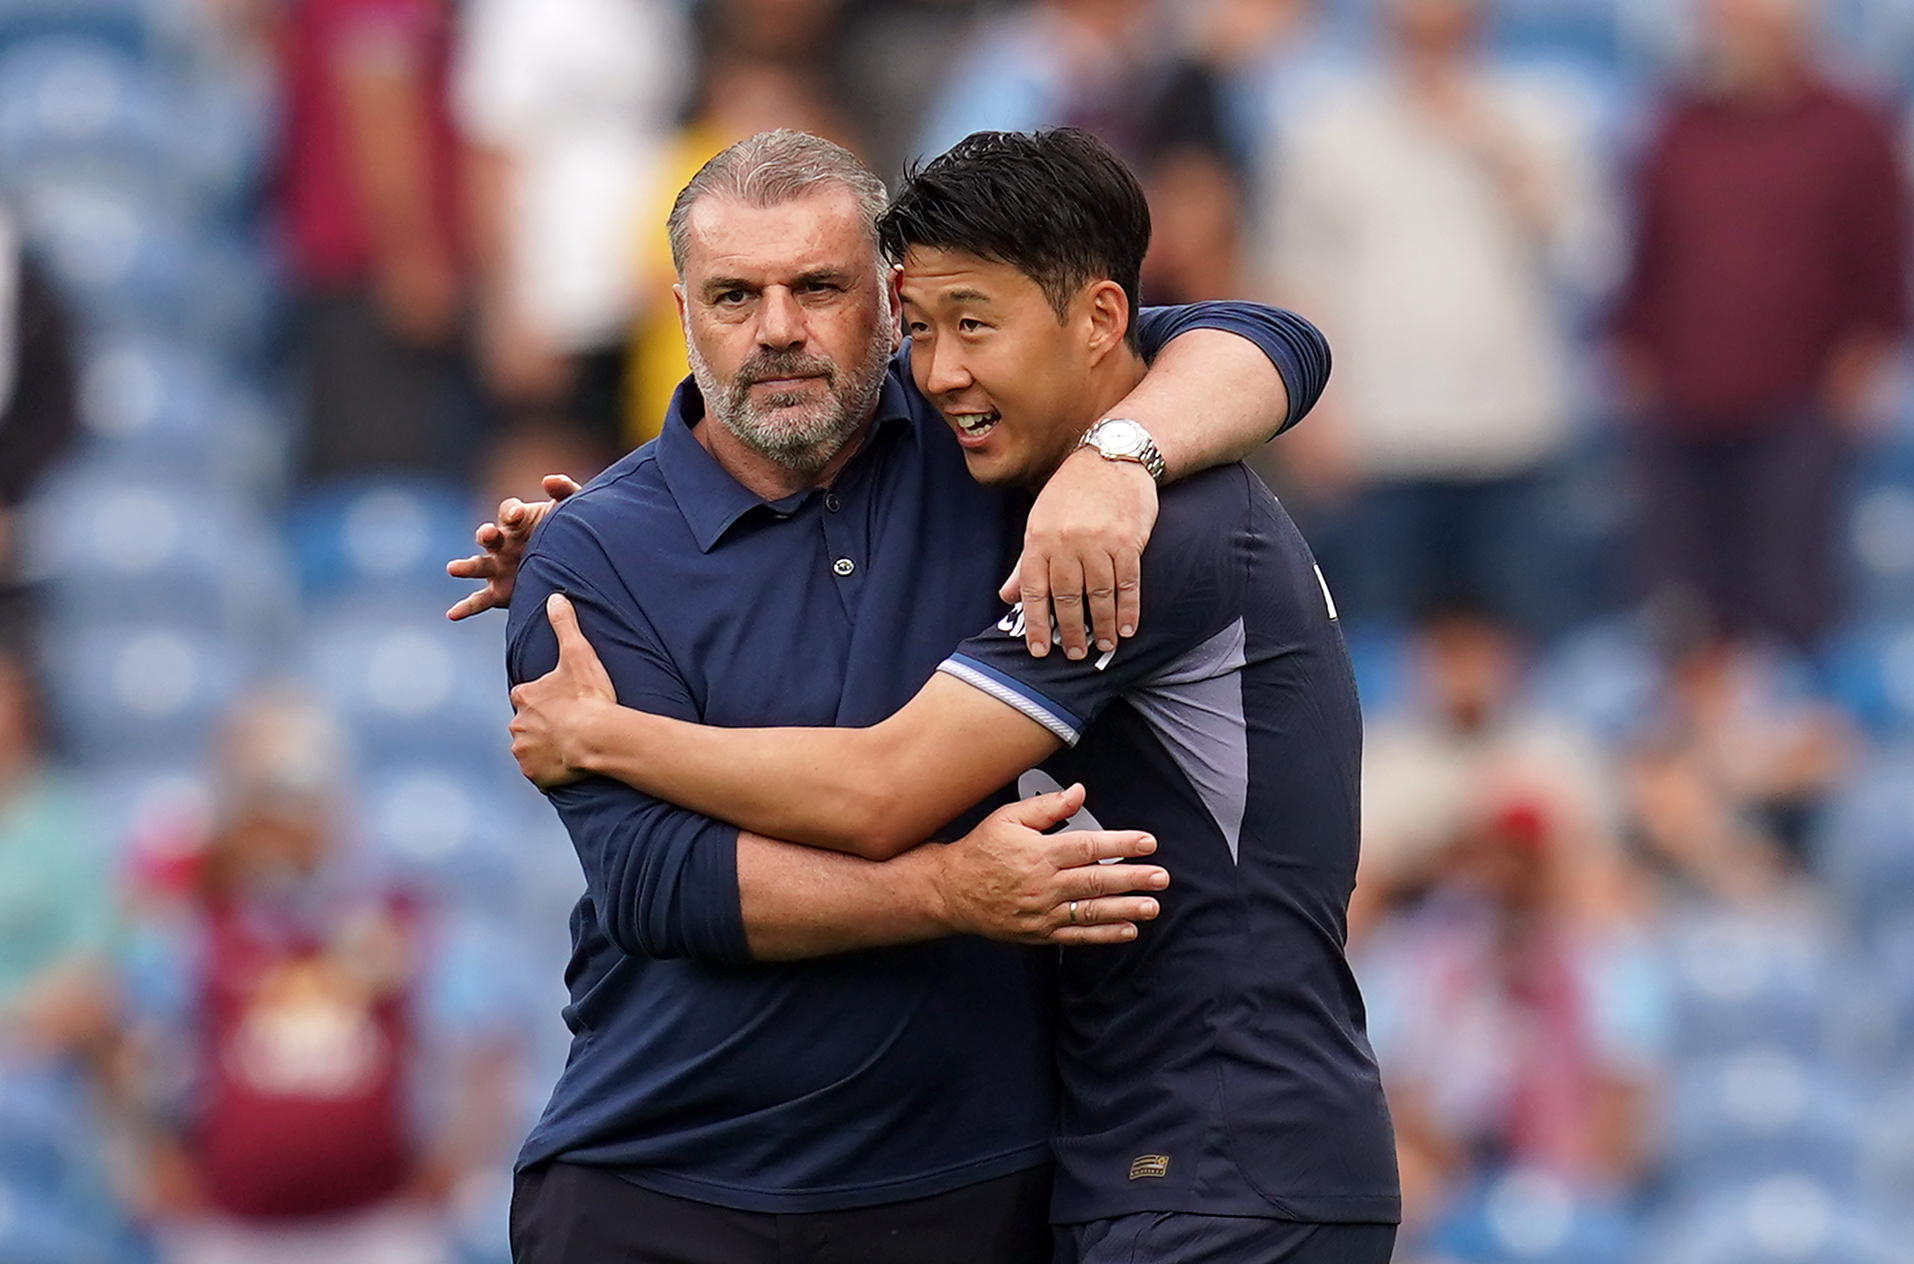 Ange Postecoglou, left, embraces Son Heung-min after the final whistle